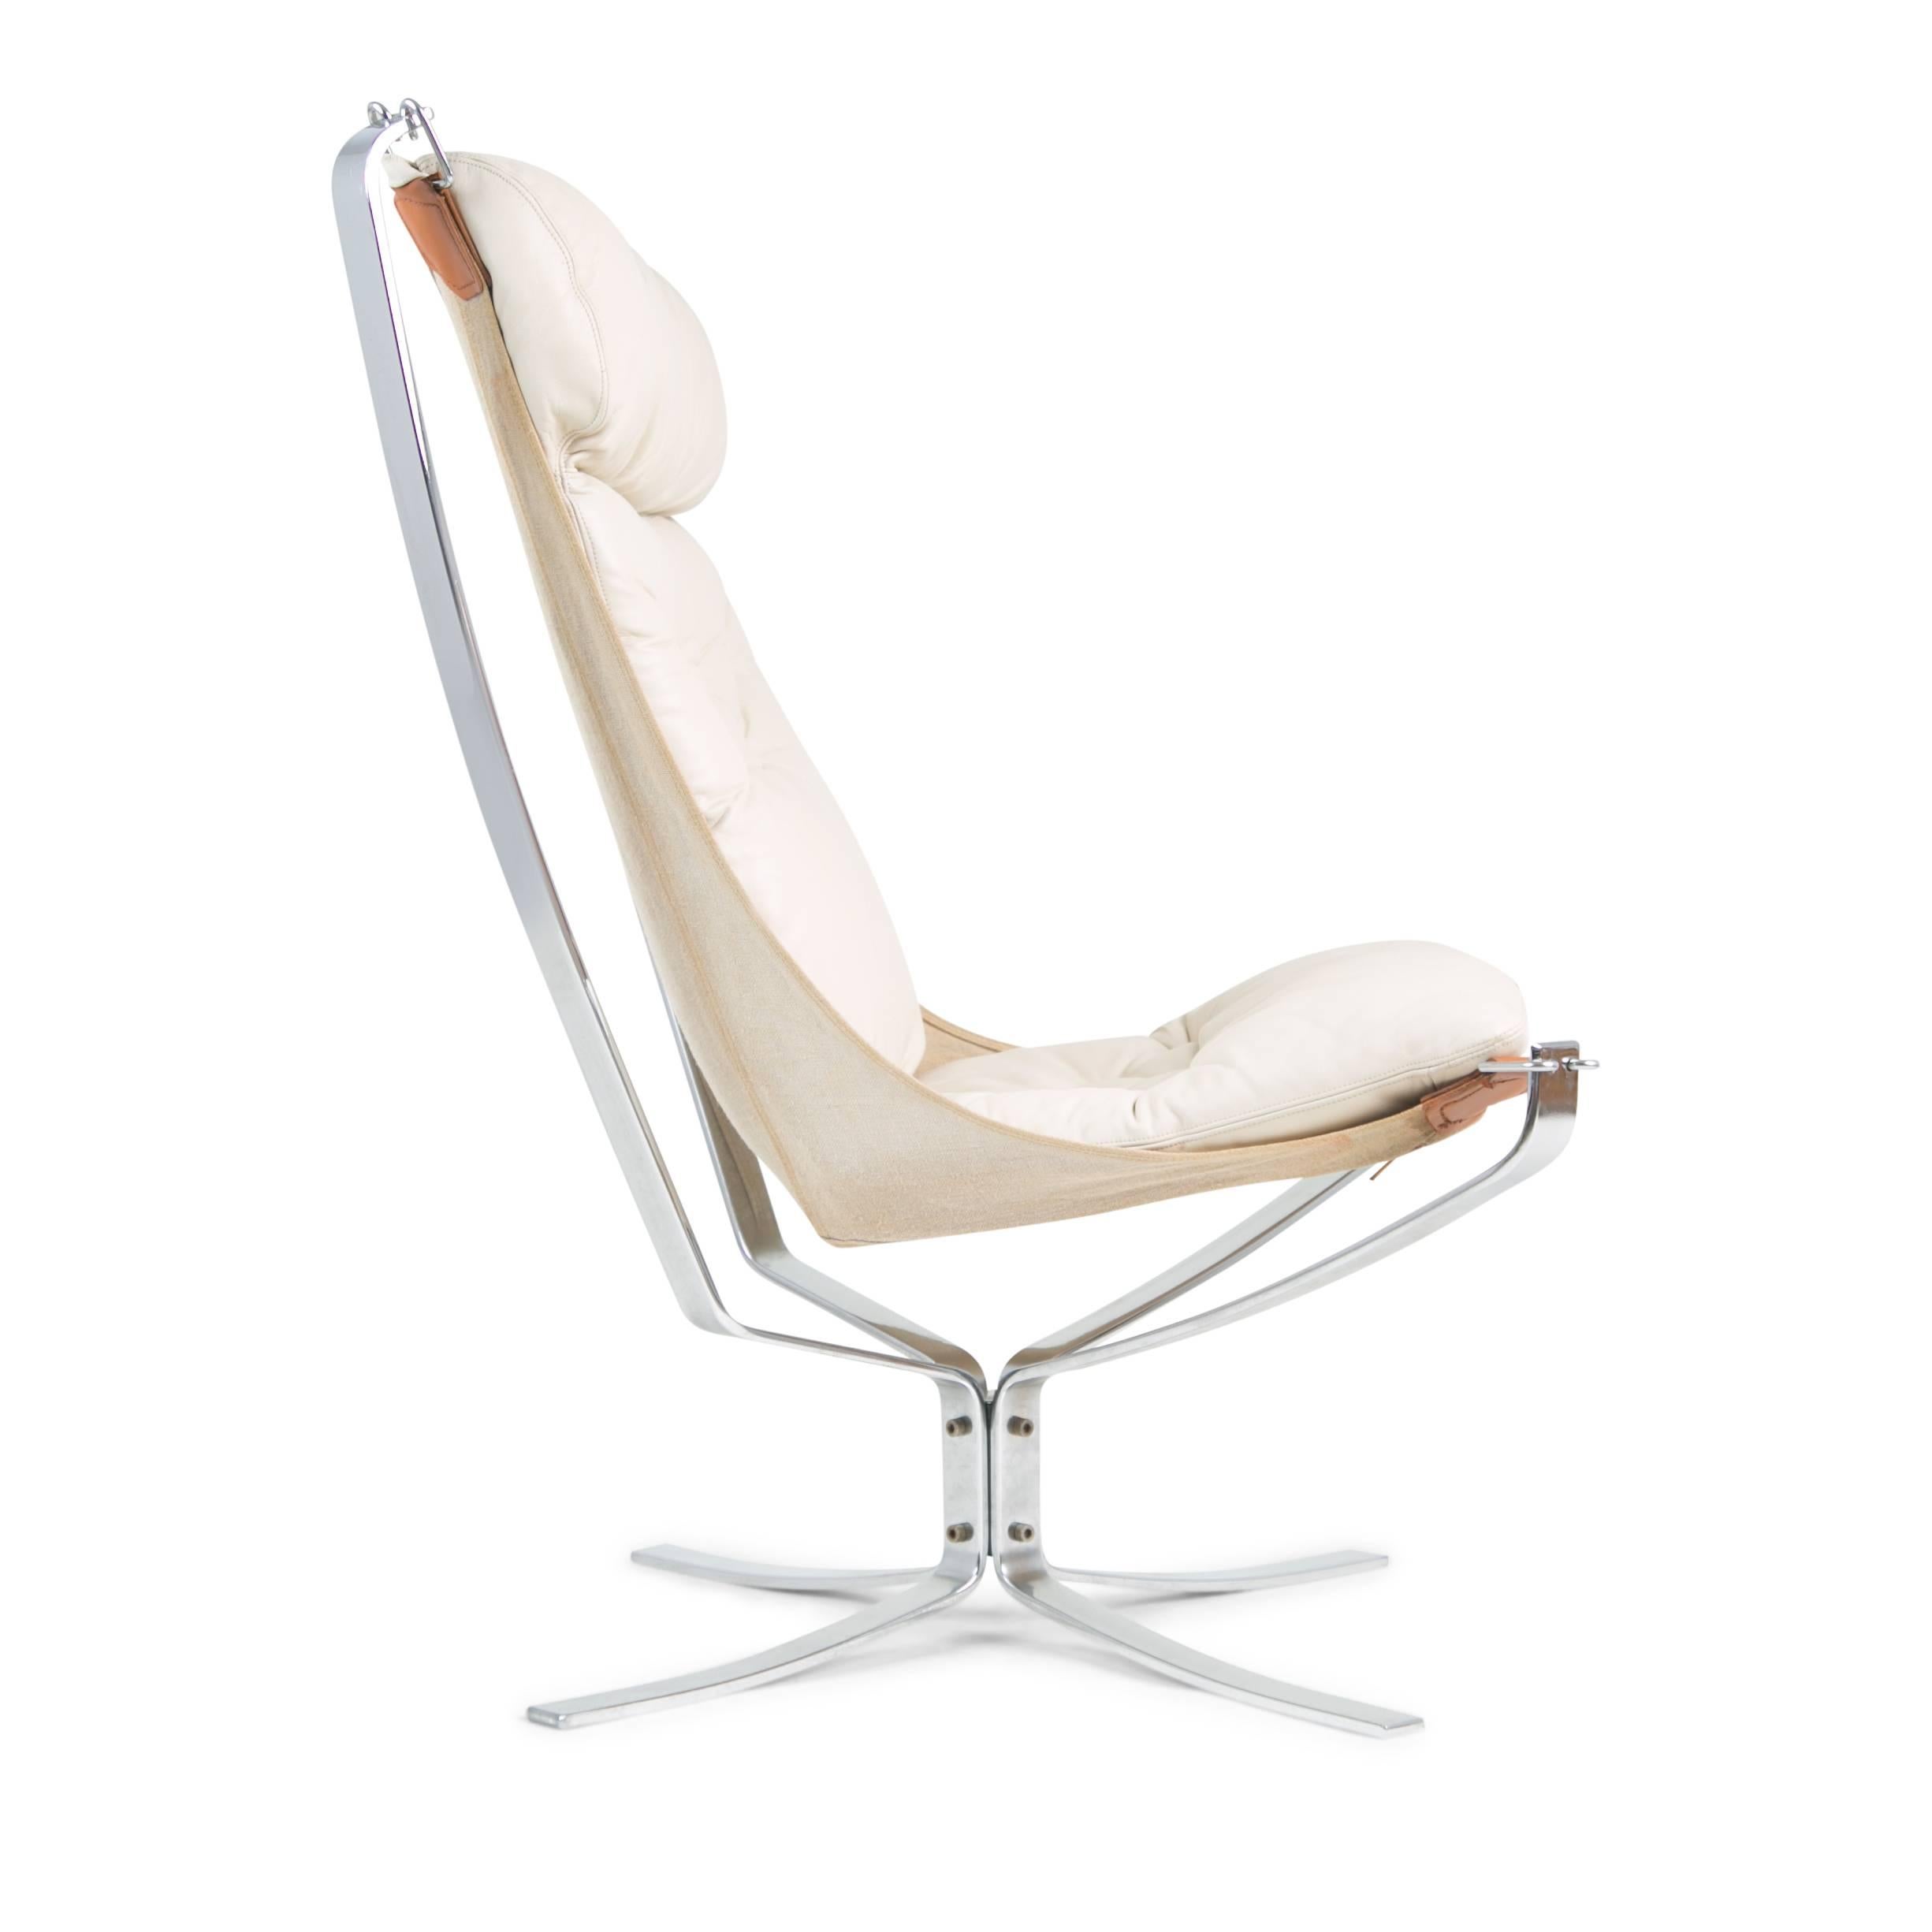 Norwegian Sigurd Ressell for Vatne Møbler High Back Chrome and White Leather Falcon Chair